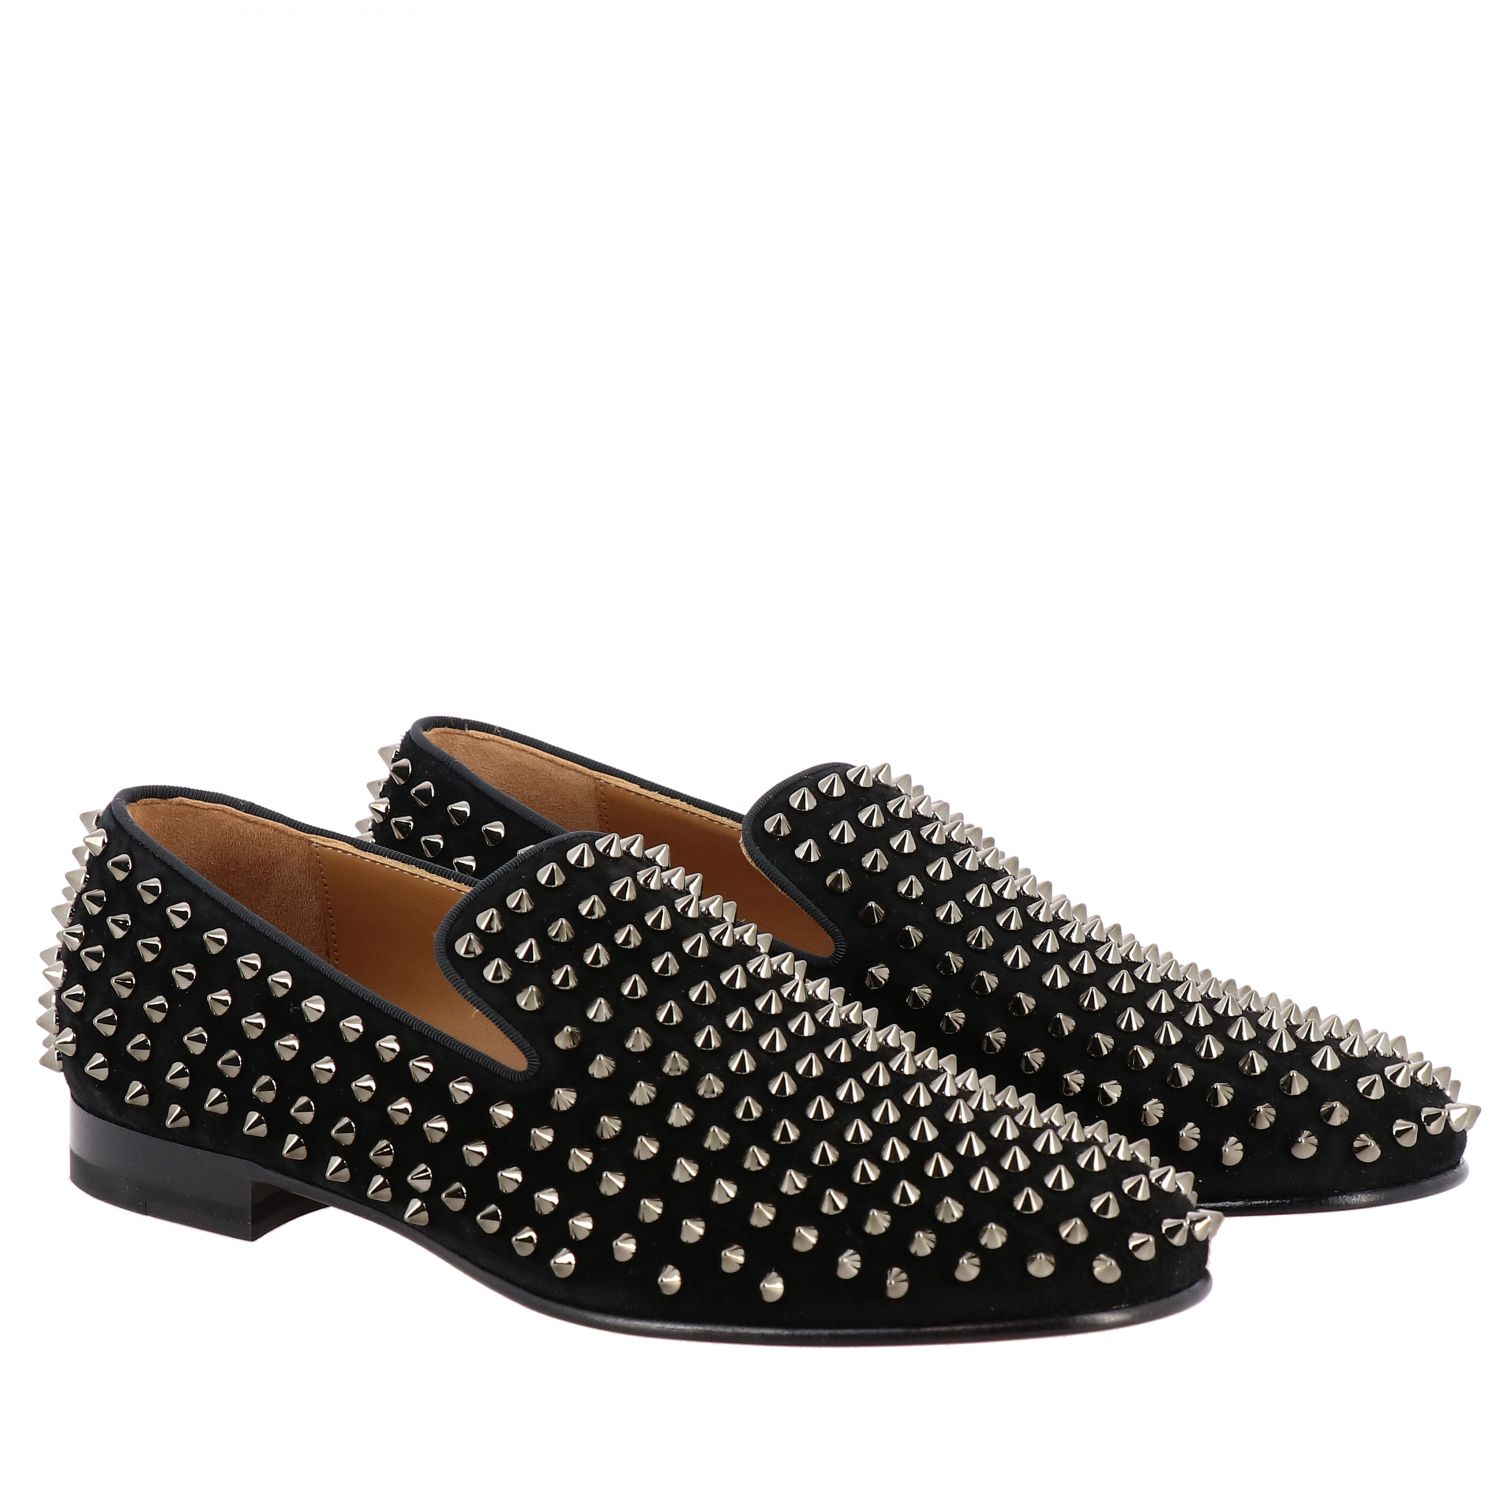 Buy > zapatos christian louboutin hombre > in stock